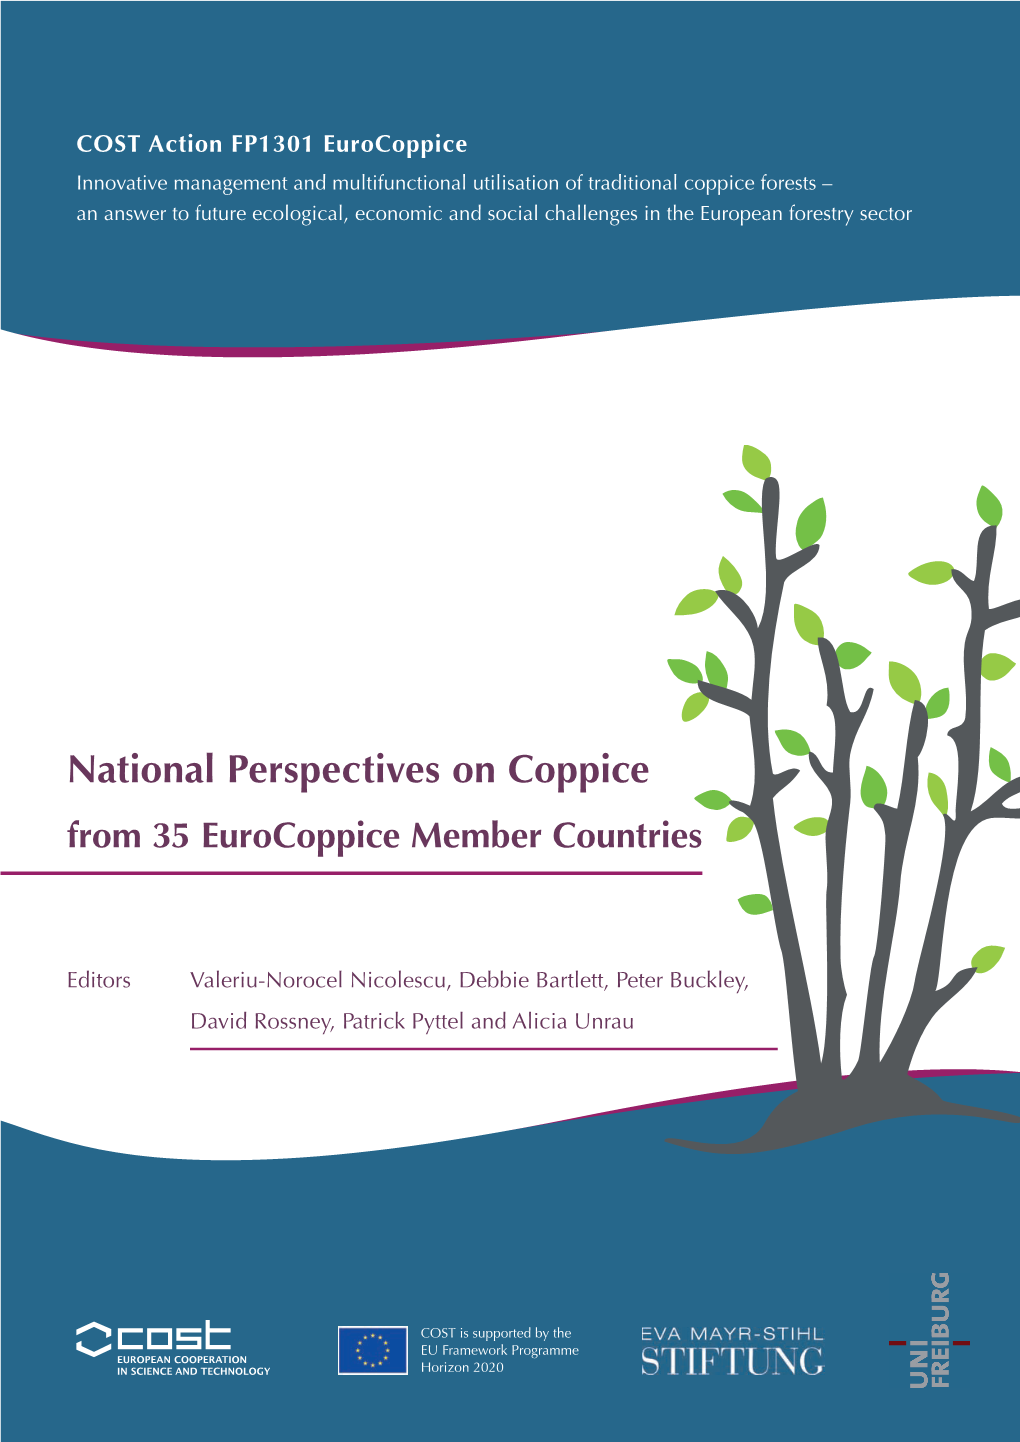 National Perspectives on Coppice from 35 Eurocoppice Member Countries